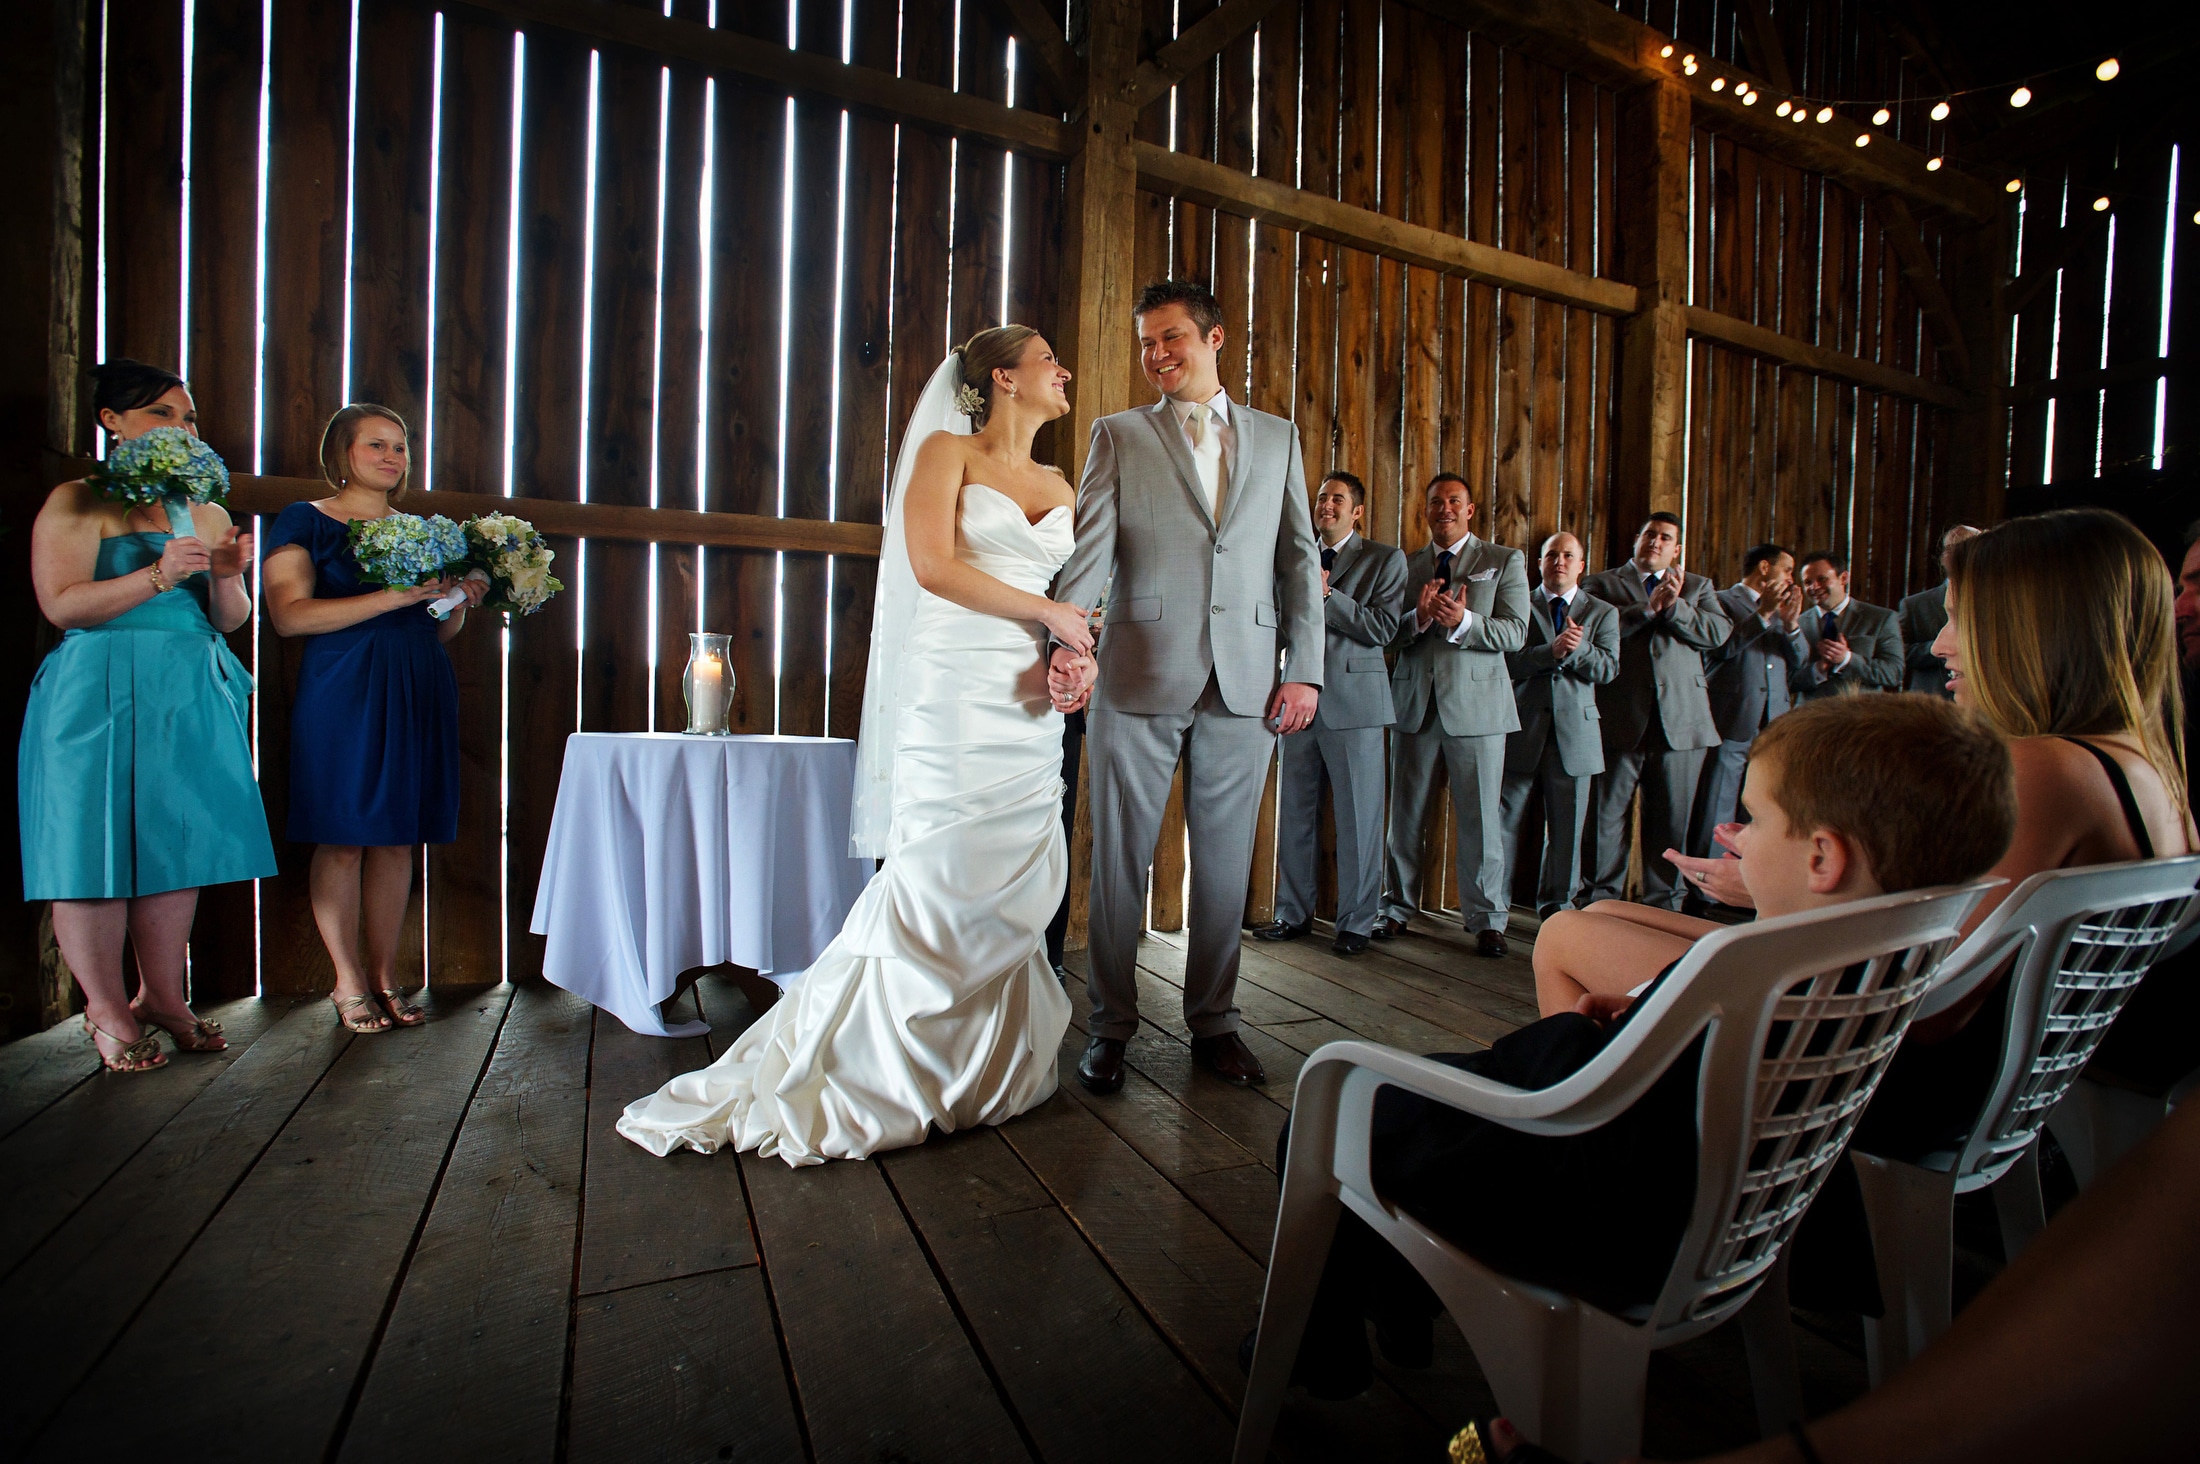 A bride and groom smile at each other at the end of their wedding ceremony inside of a barn on a rainy day.